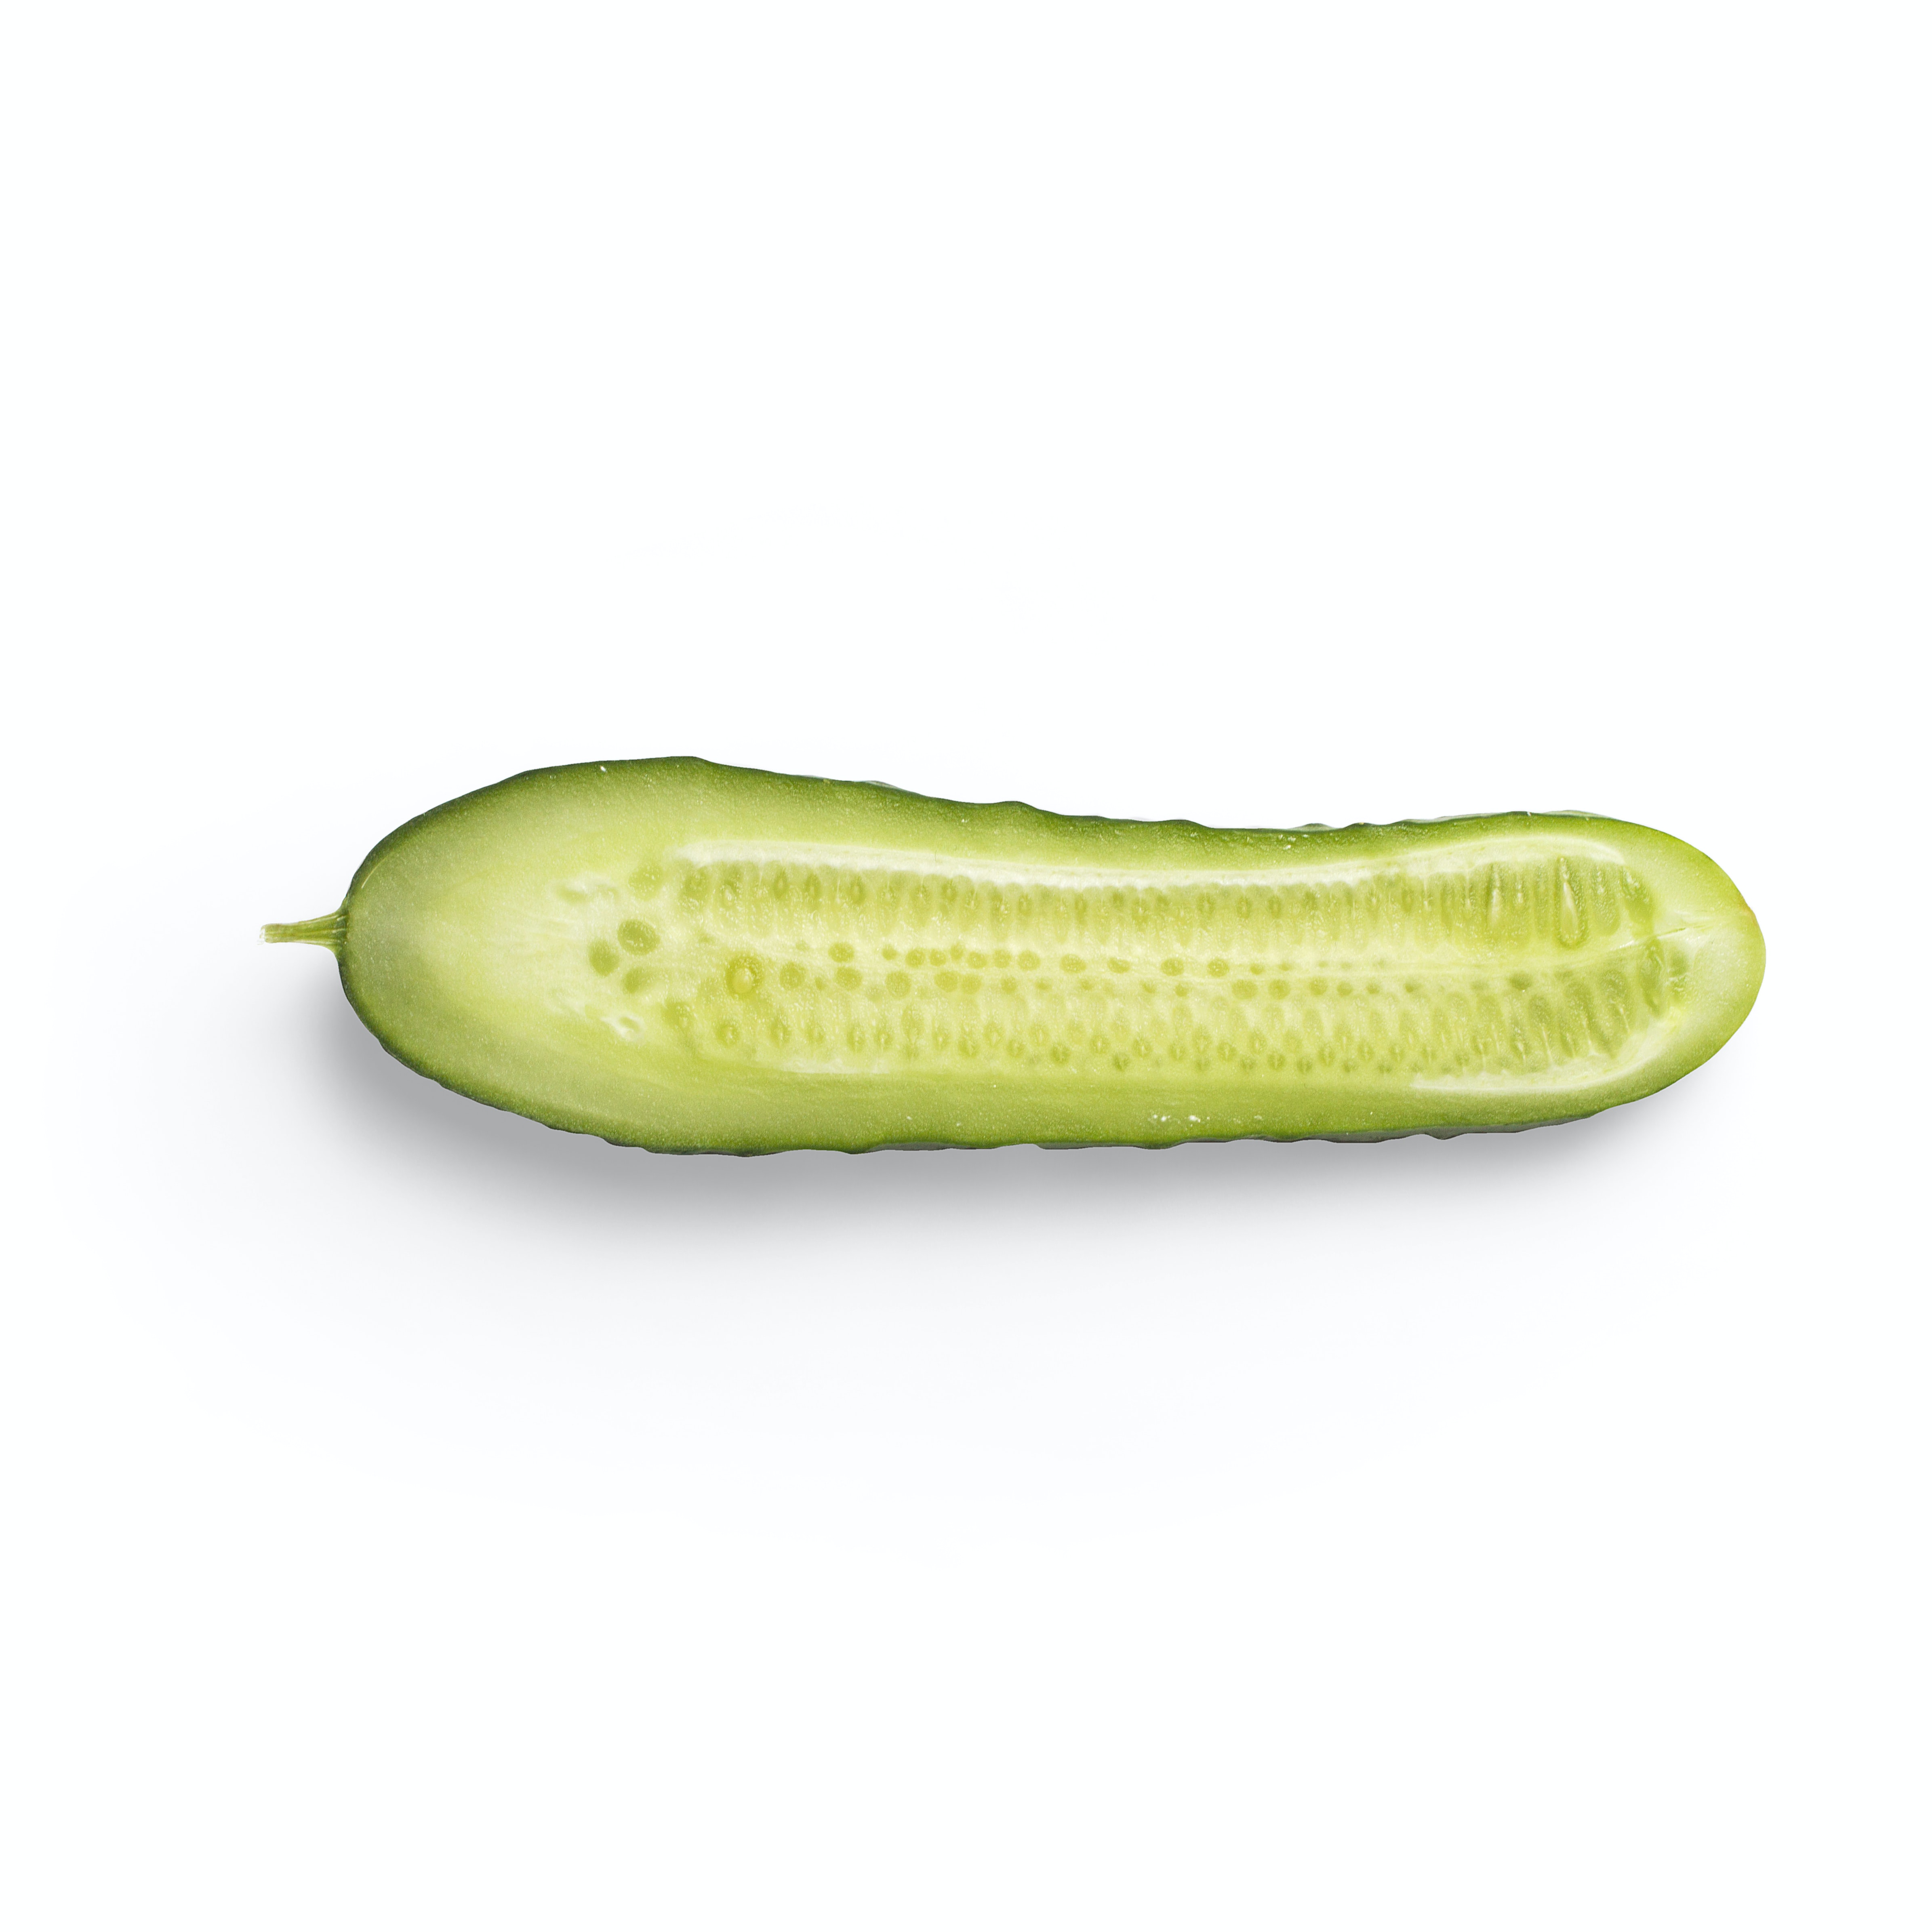 A dill pickle which is bisected length-wise, appears on a white background, seed side up.